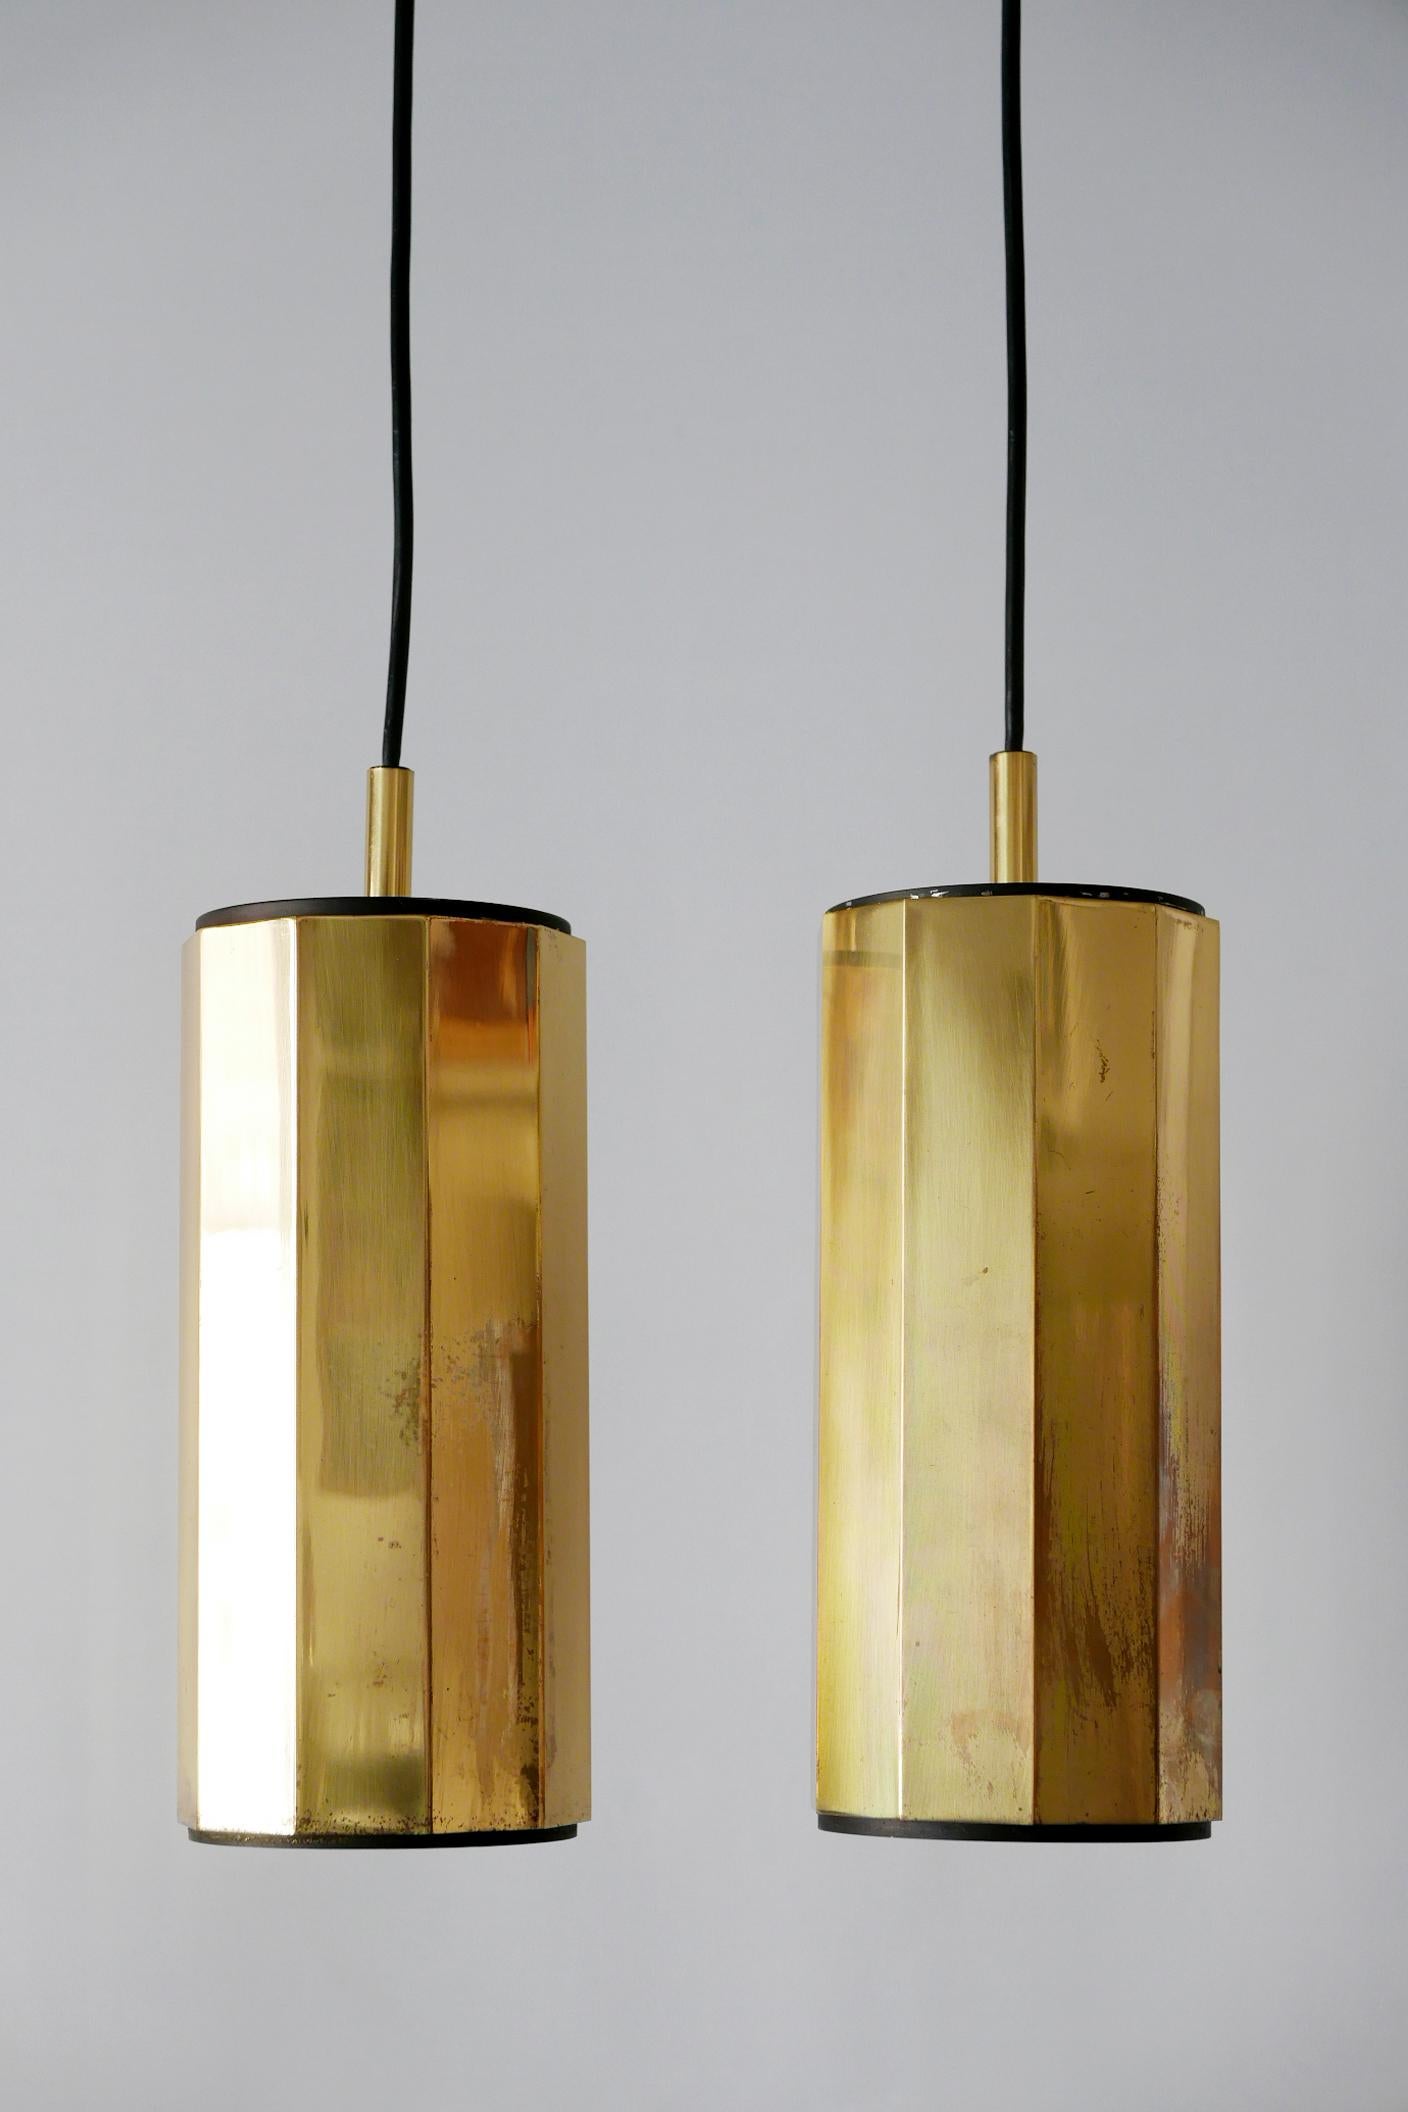 Set of two extremely rare and elegant Mid-Century Modern decagonal brass pendant lamps. Manufactured probably in Germany, 1960s.

The lamps are executed in brass and black lacquered metal. Each lamp needs 1 x E27/E26 Edison screw fit bulb. They